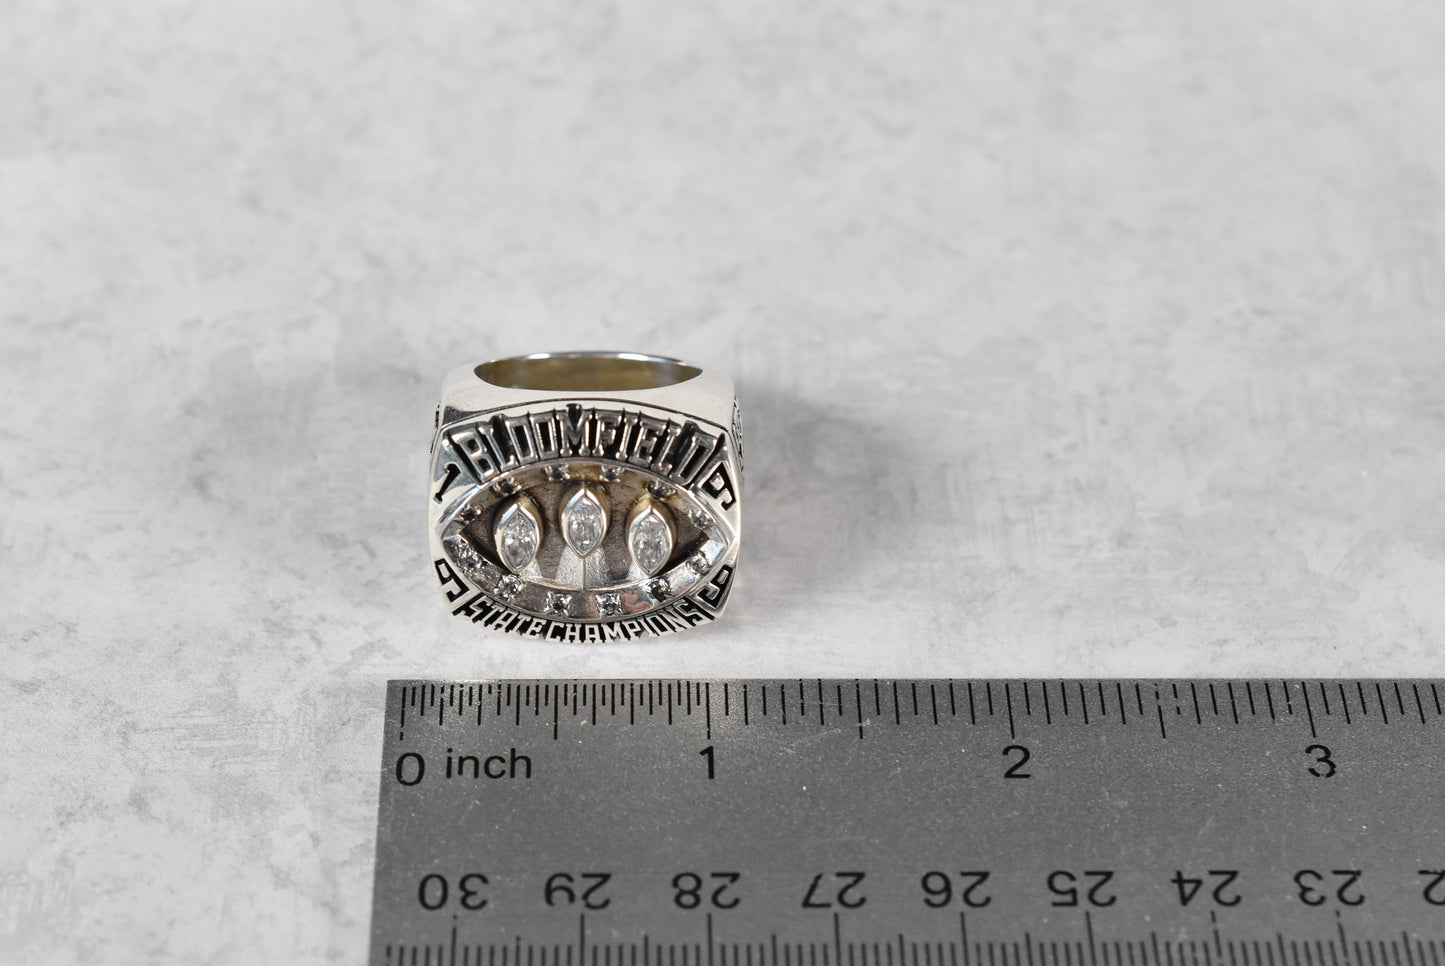 Sterling Silver 1999 Bloomfield State Championship Ring, Size 9.5 - 31.1g